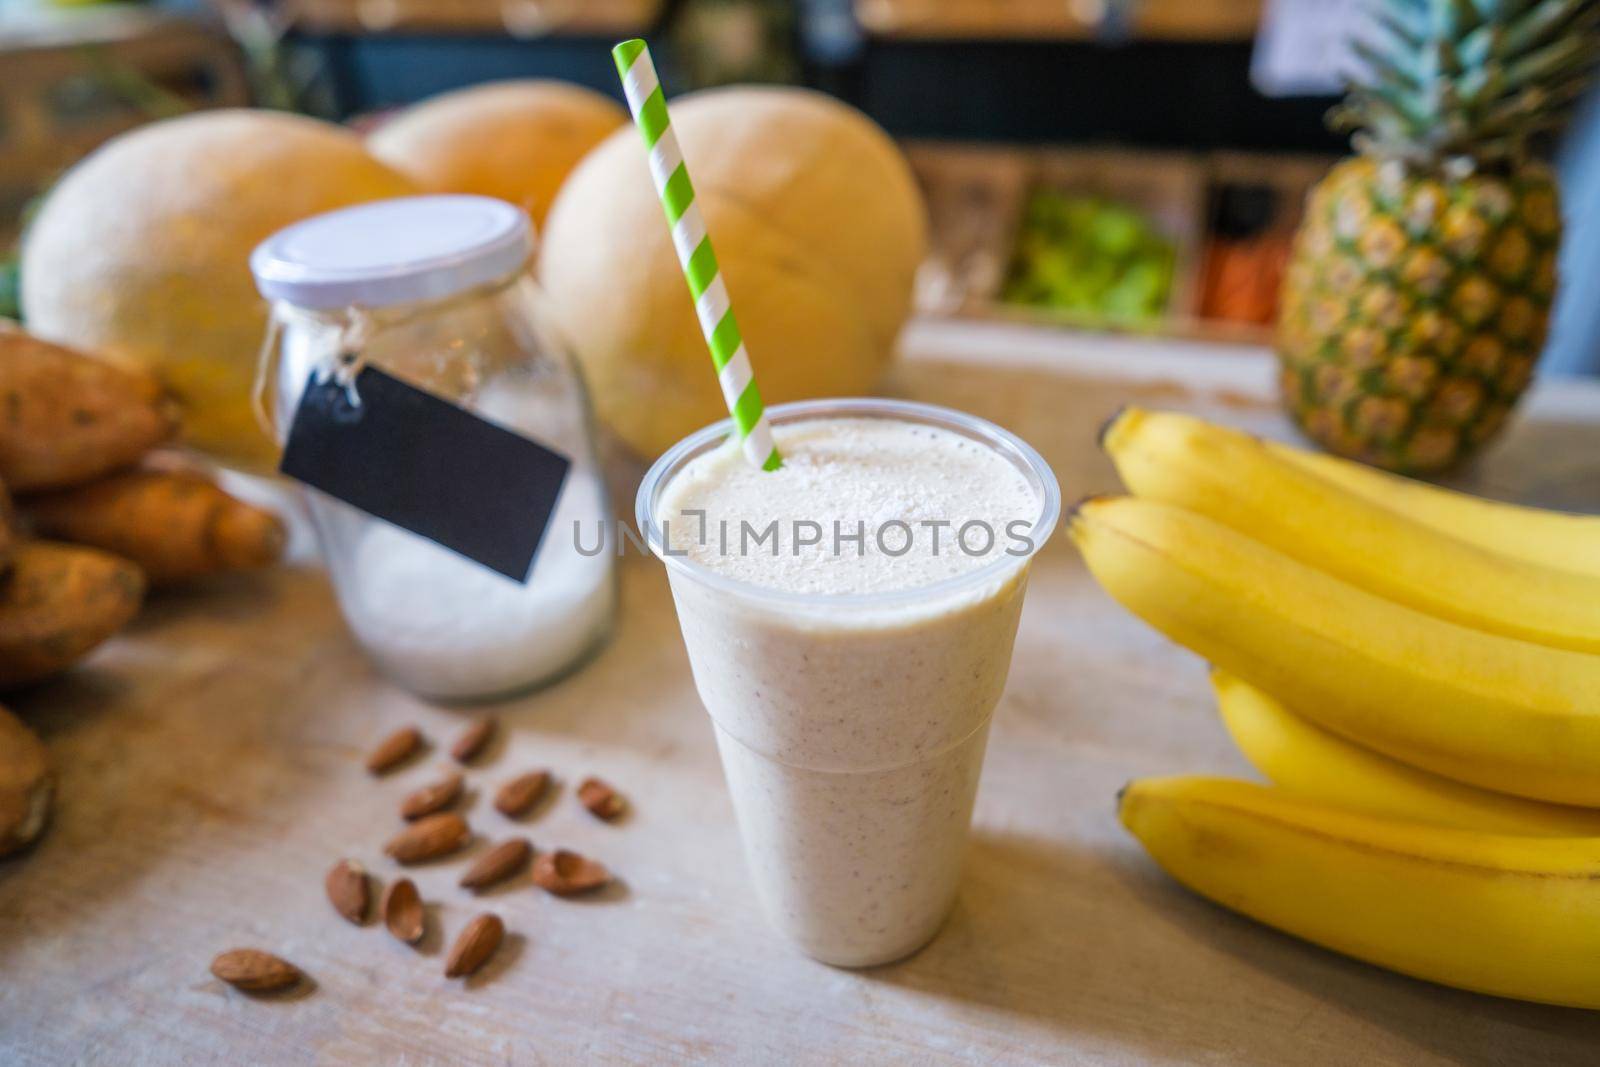 Healthy fruit shake on table with fruits and vegetables ingredients around.